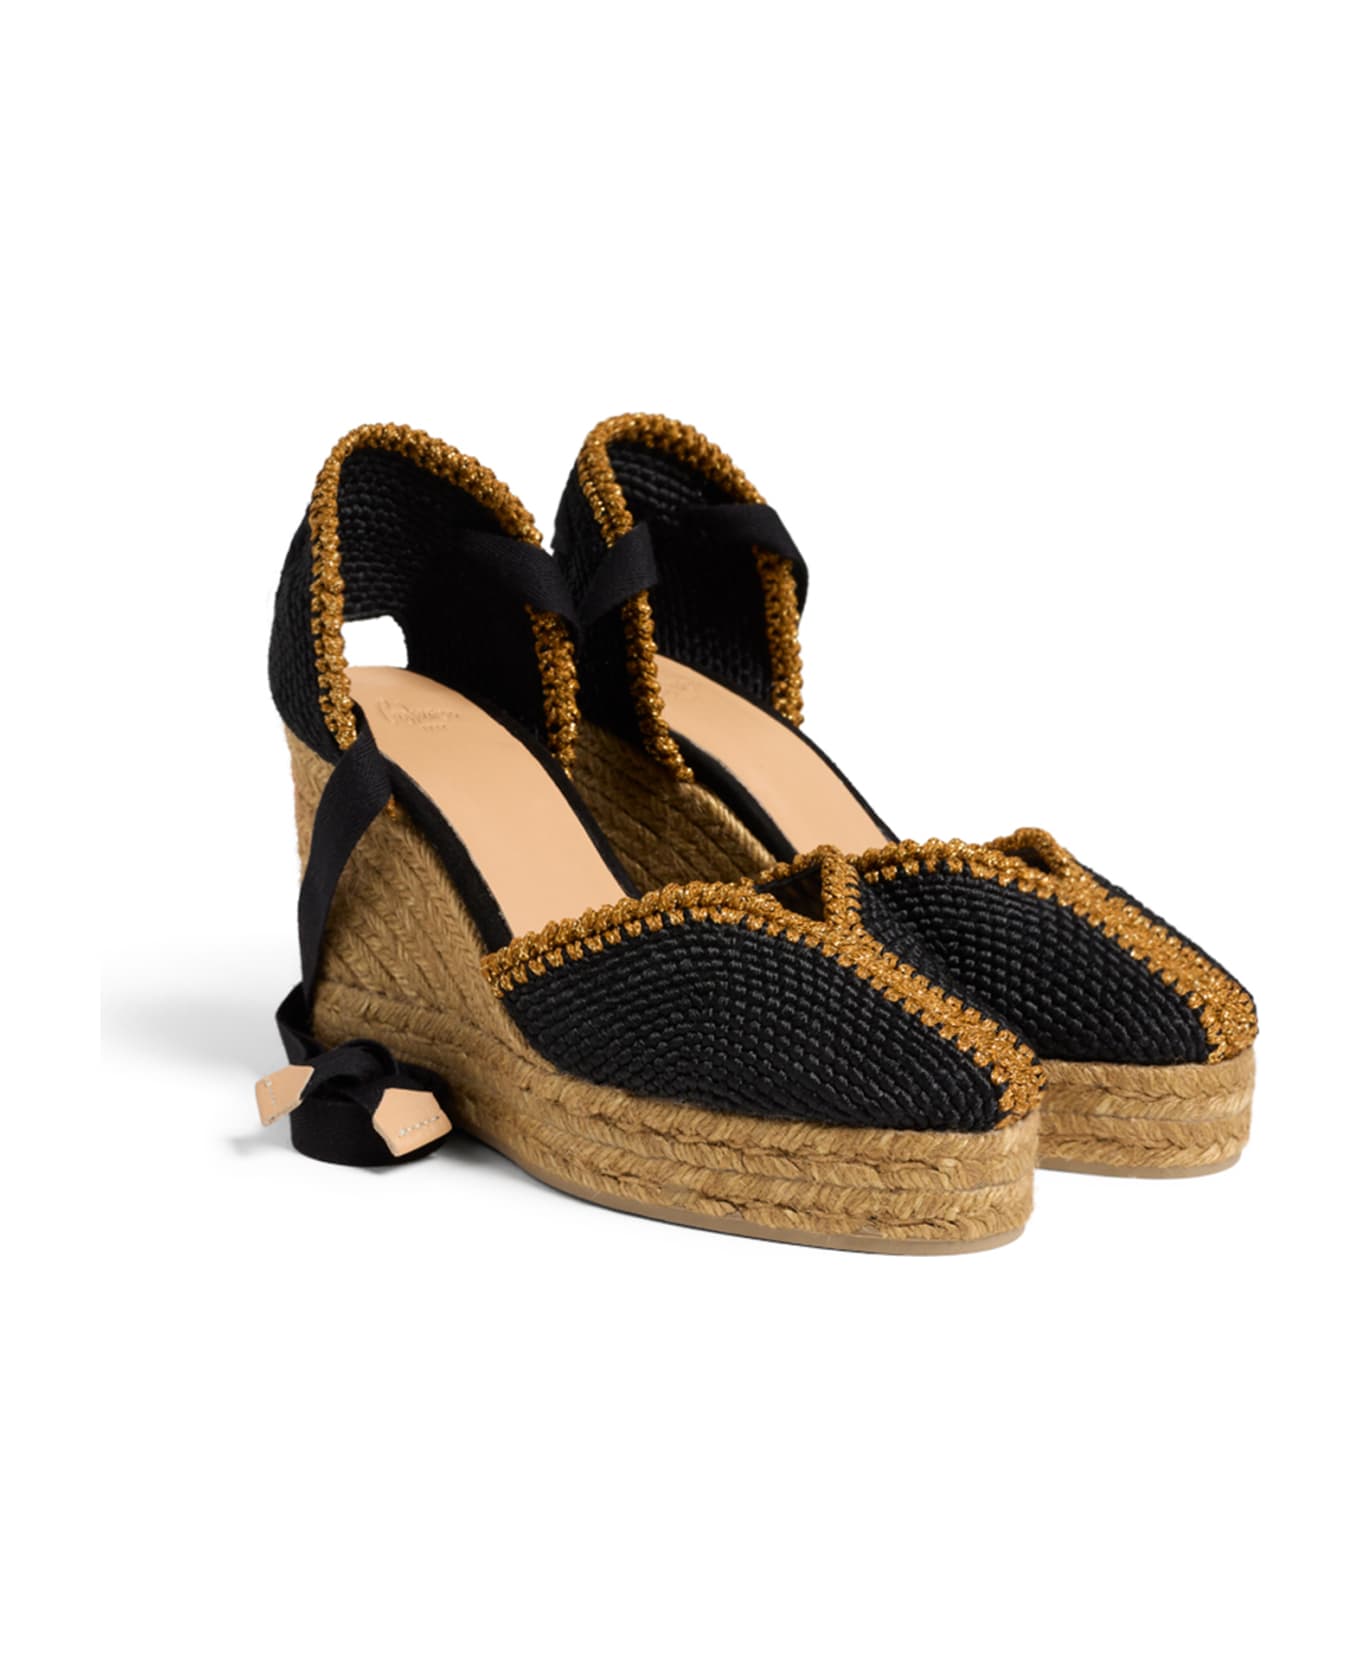 Castañer Espadrilles Coeur With Wedge And Laces - FANTASIA NEGRO ウェッジシューズ